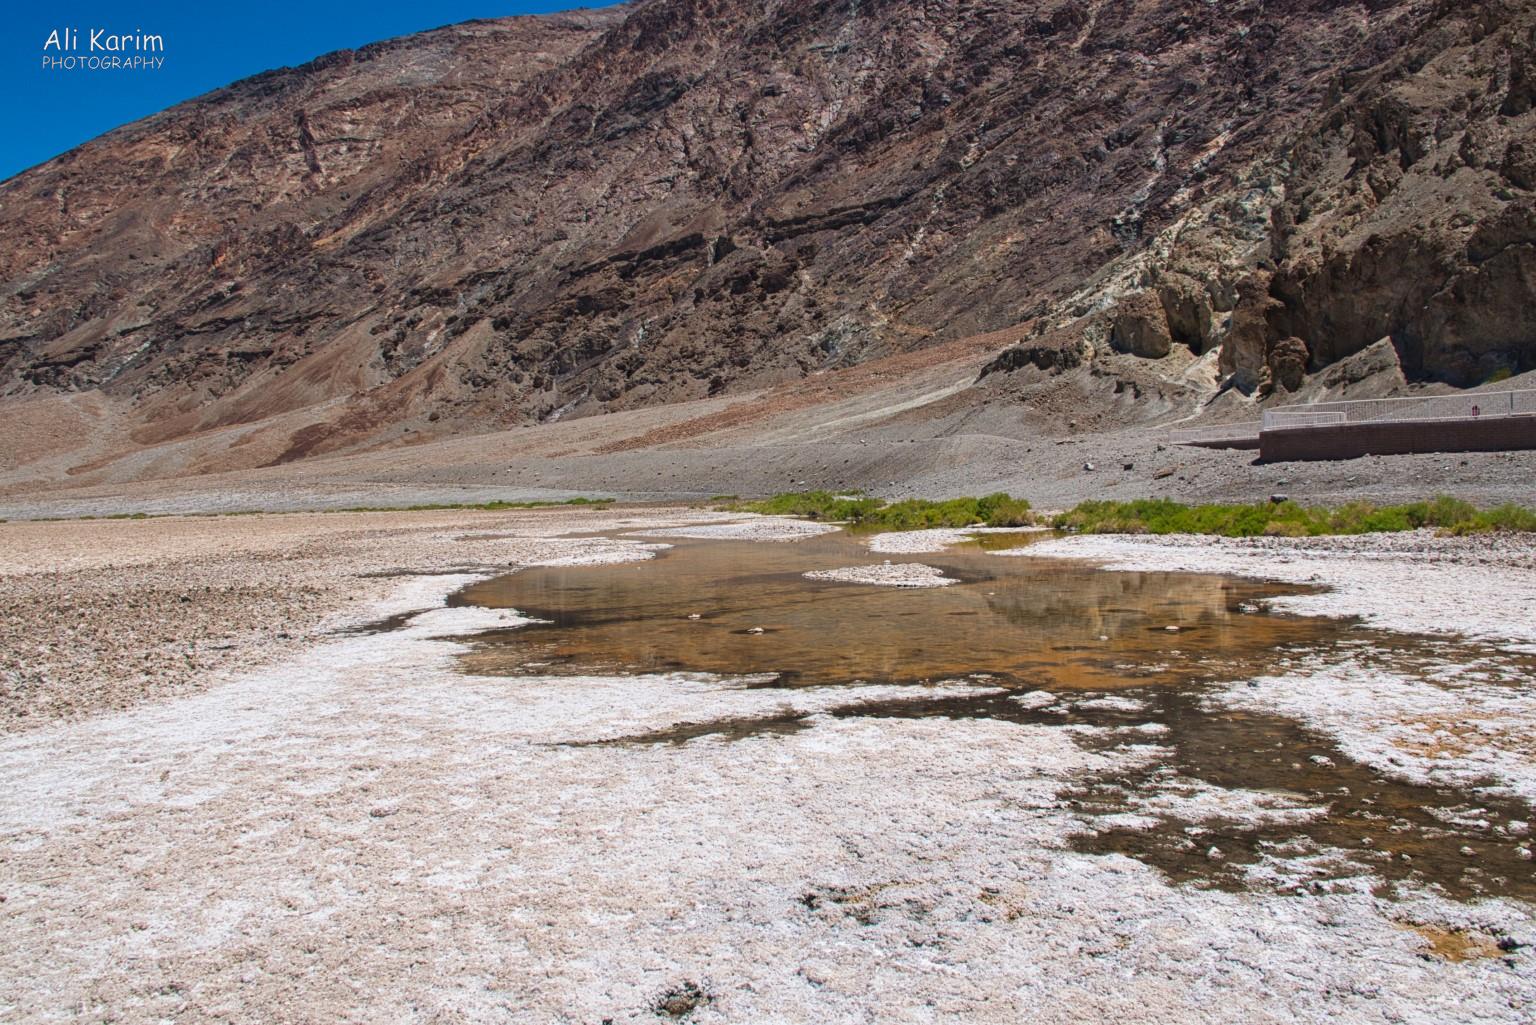 Death Valley National Park, June 2020, Badwater pool and the saline deposits around it left over after the water evaporated. The water was very salty